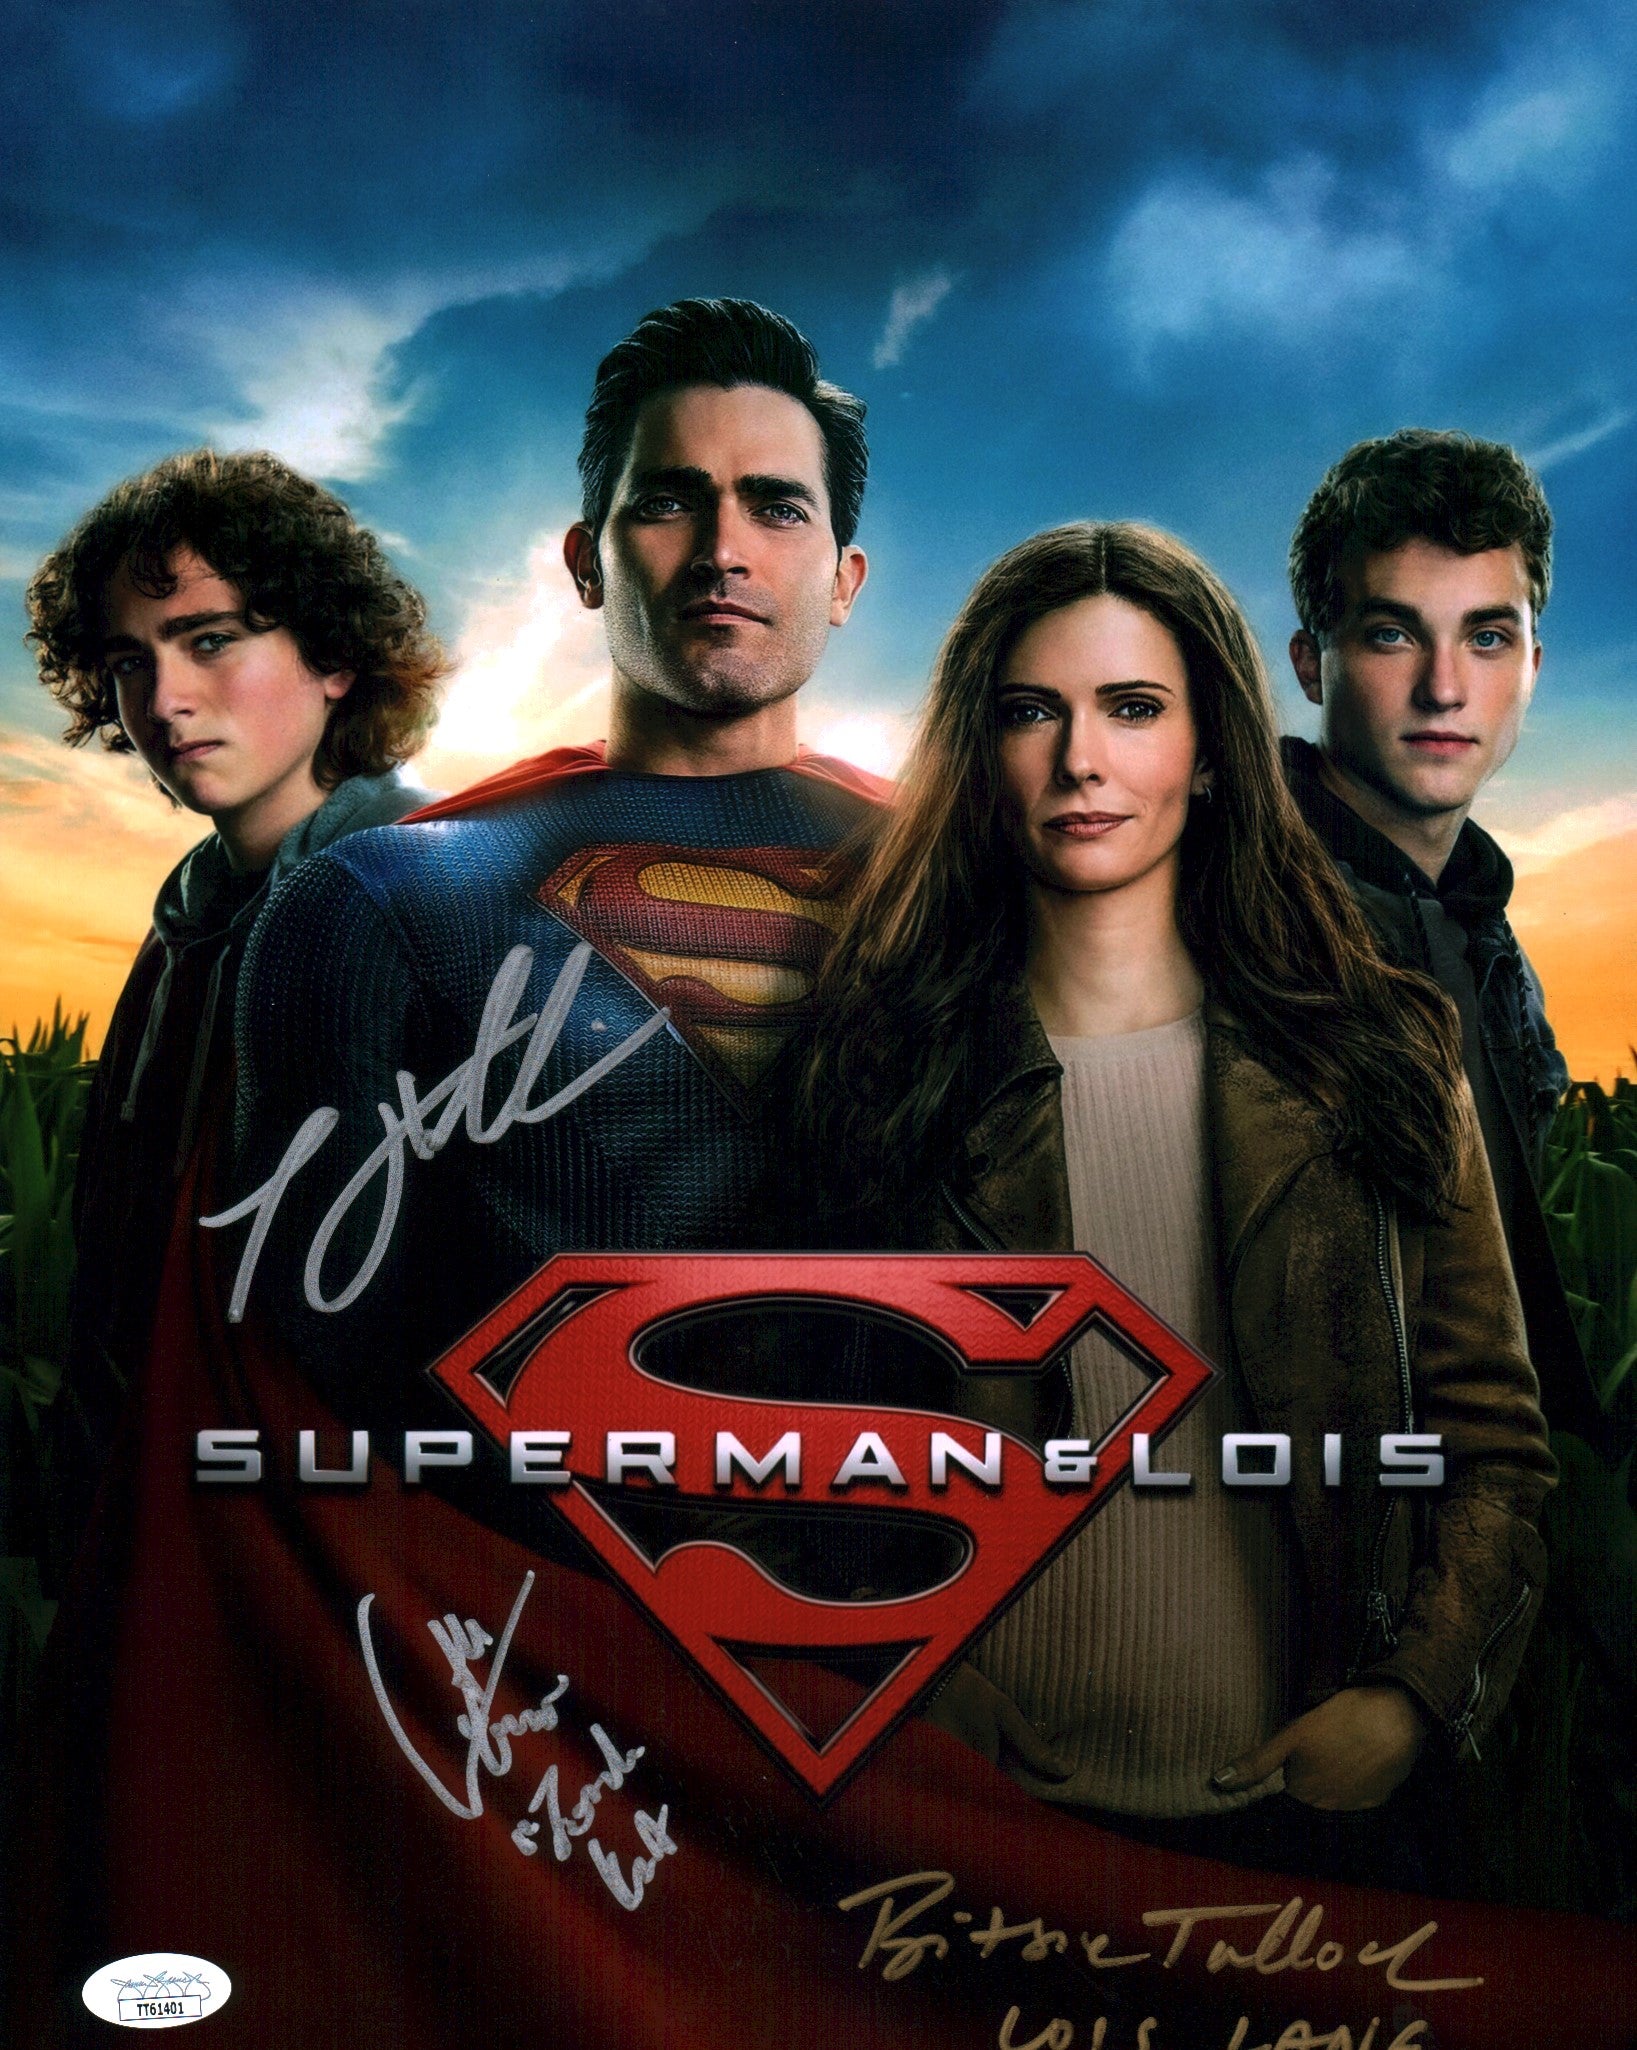 Superman and Lois 11x14 Signed Photo Poster Garfin Hoechlin Tulloch JSA COA Certified Autograph